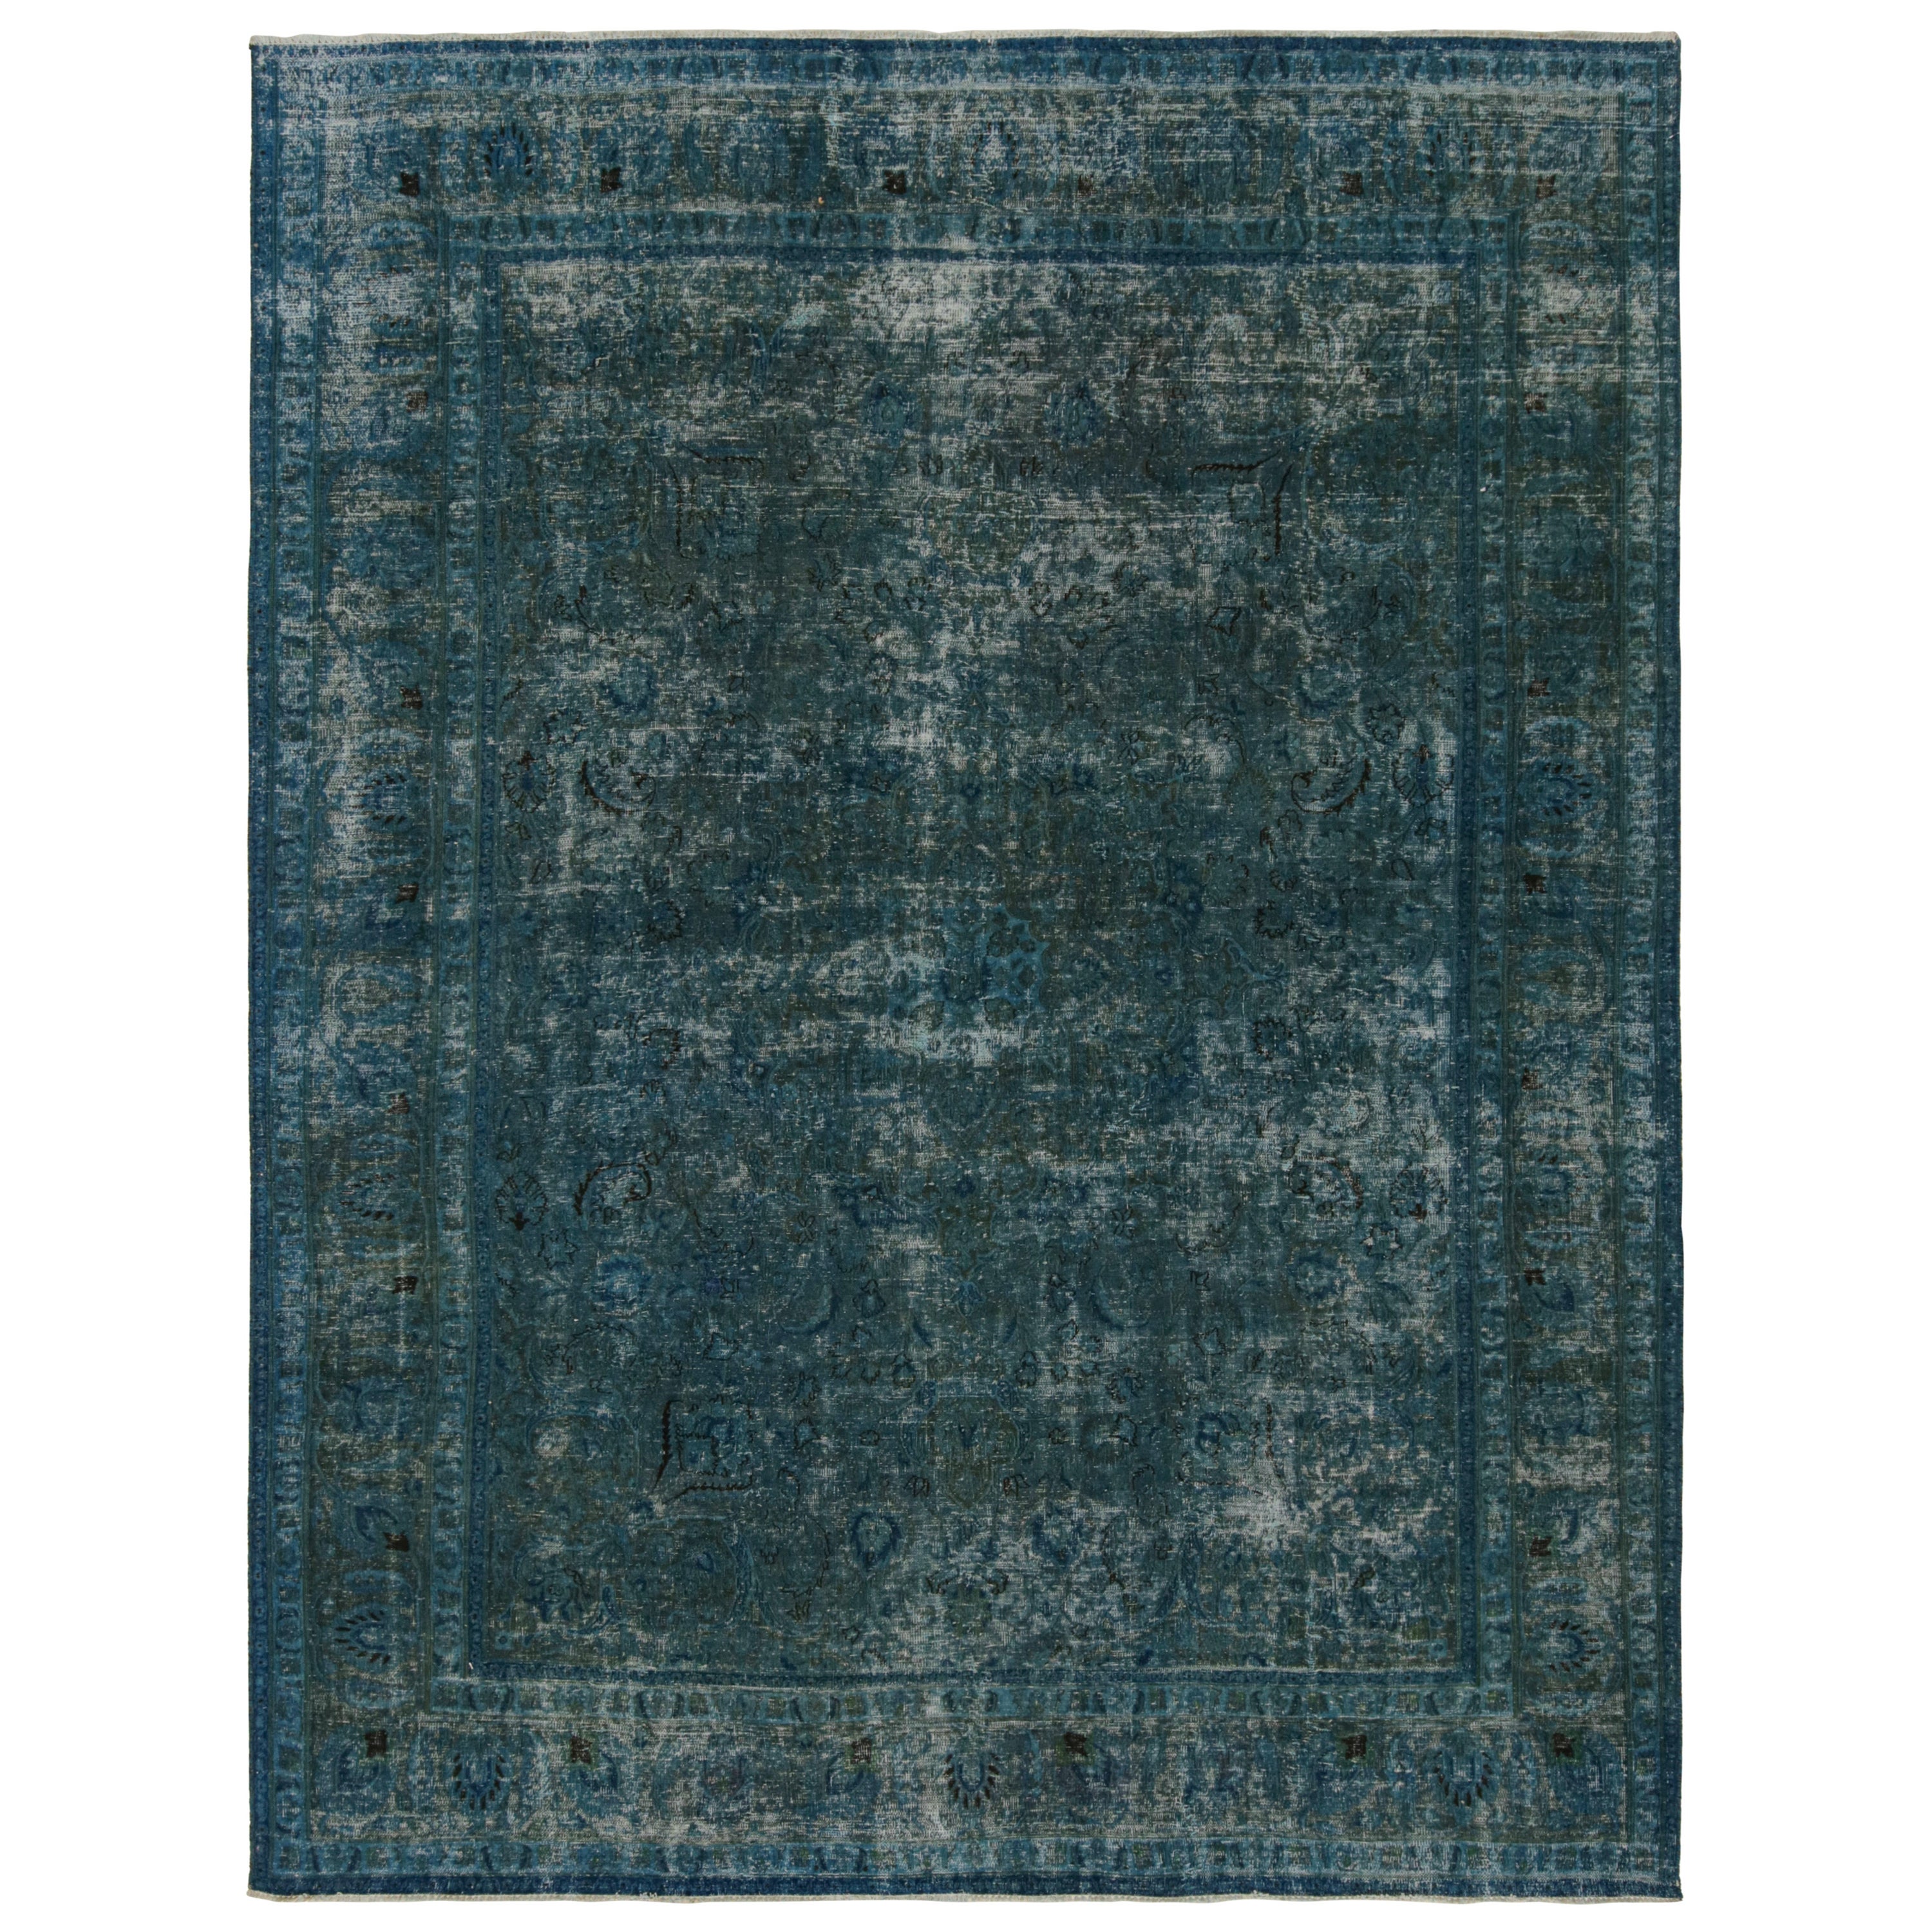 Vintage Persian Rug With Blue Floral Patterns, From Rug & Kilim